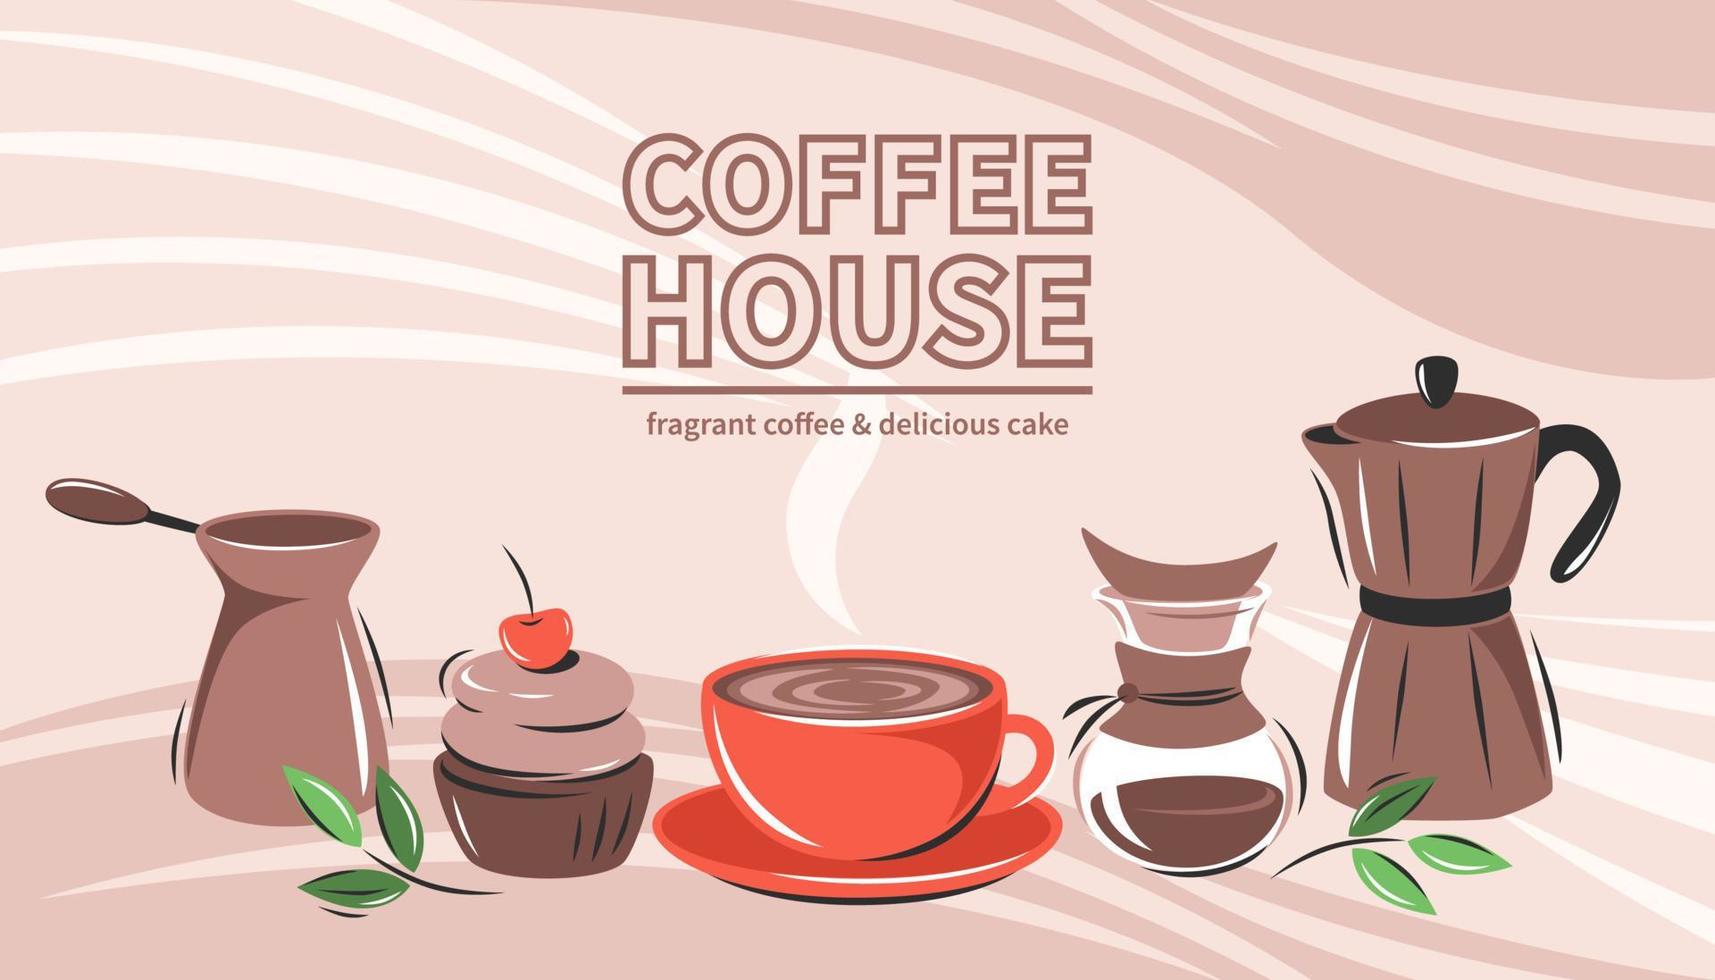 Banner for coffee house, coffee shop, cafe-bar, barista, restaurant, menu. Coffee maker, coffee and cakes.  Vector illustration